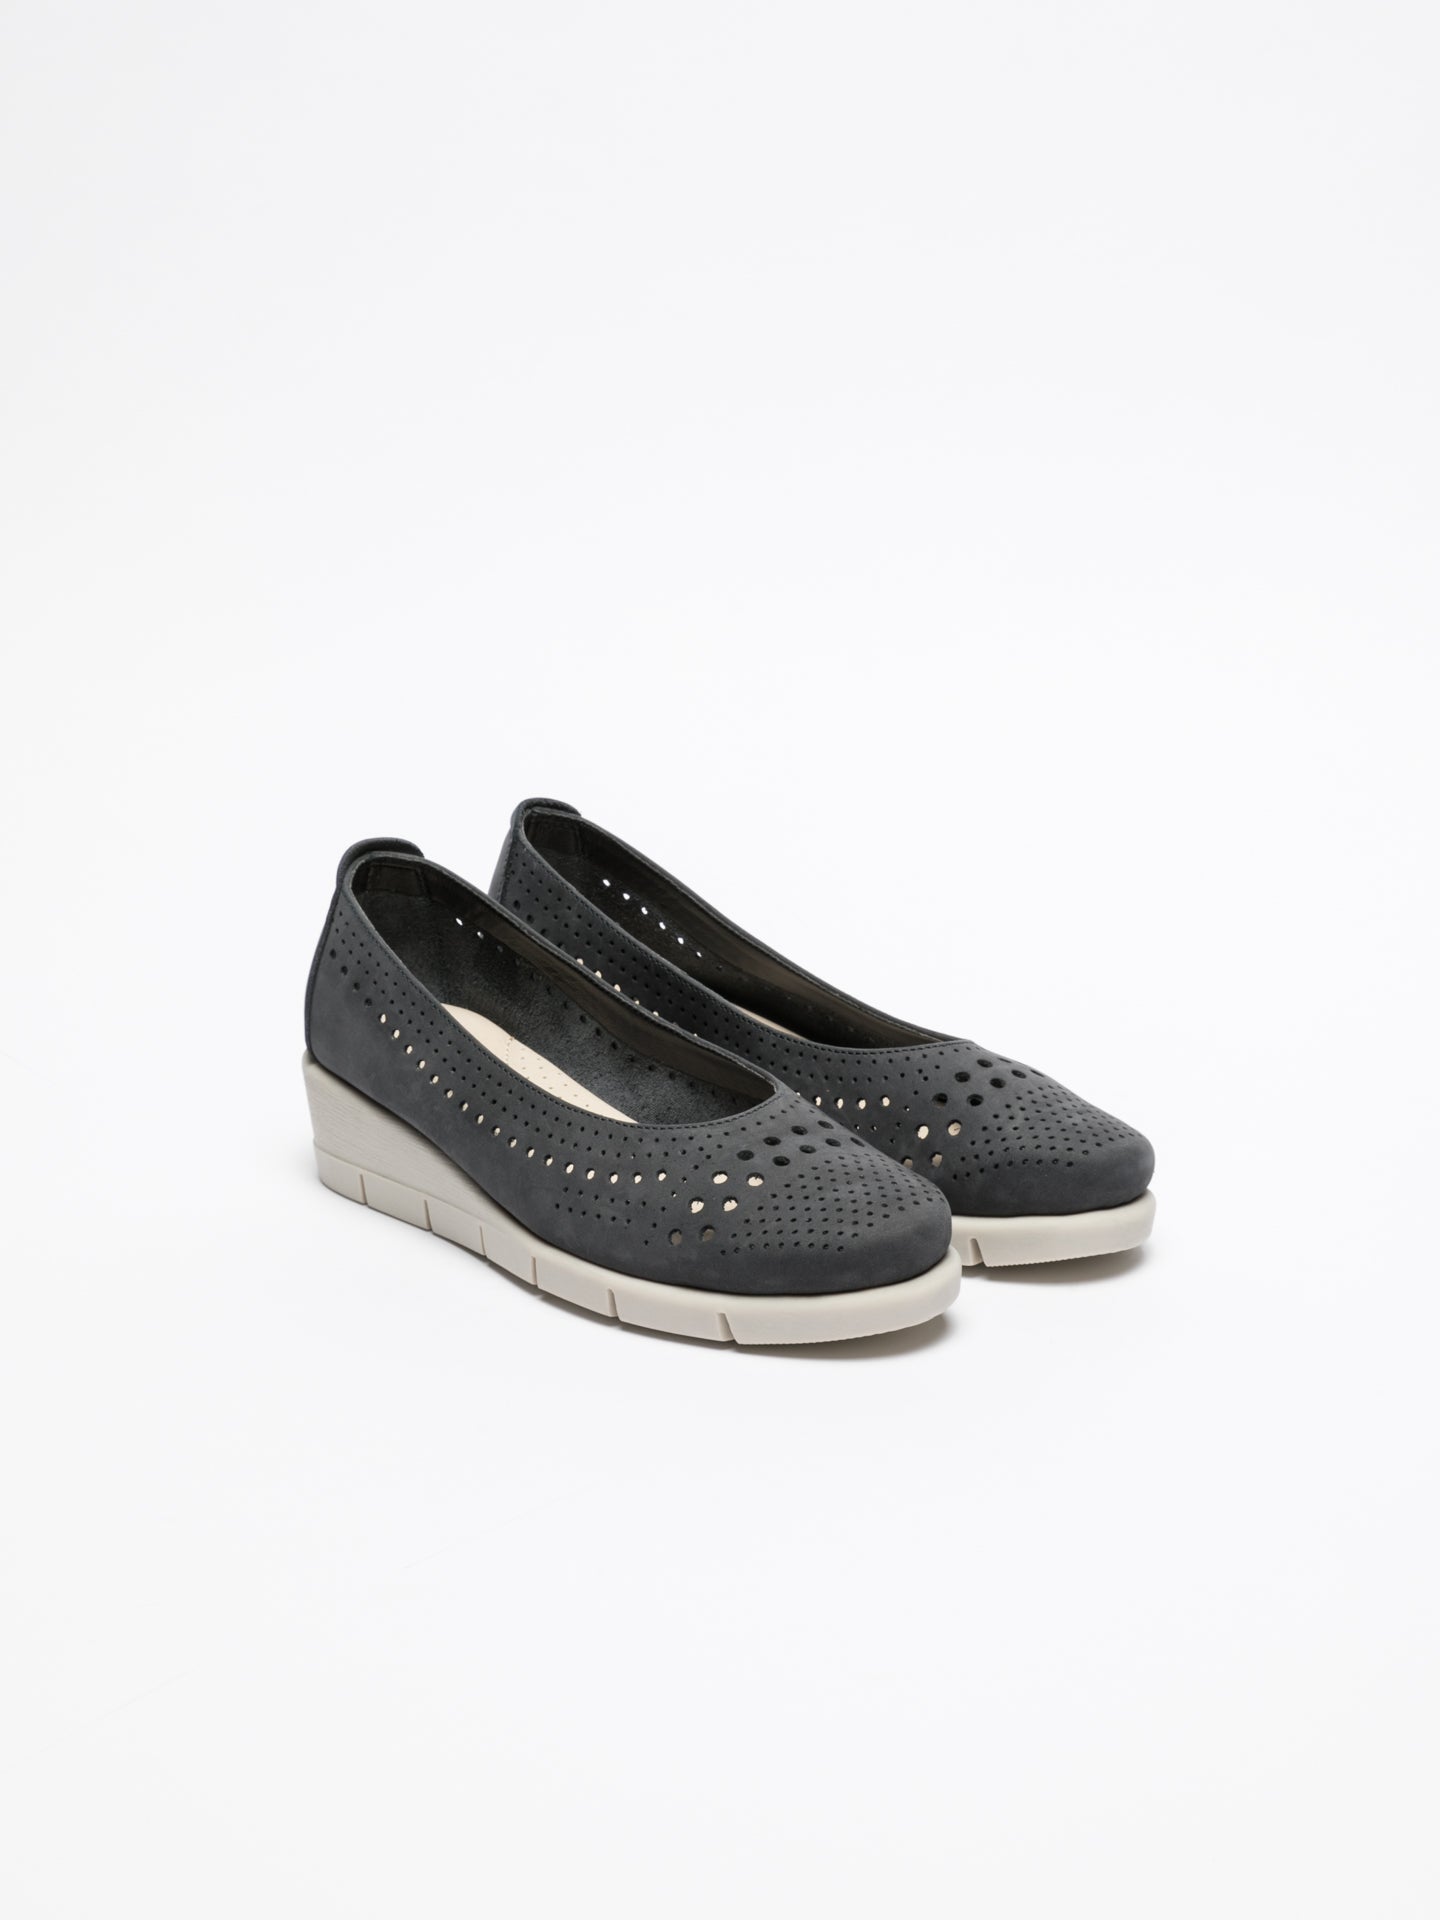 The Flexx Navy Wedge Shoes